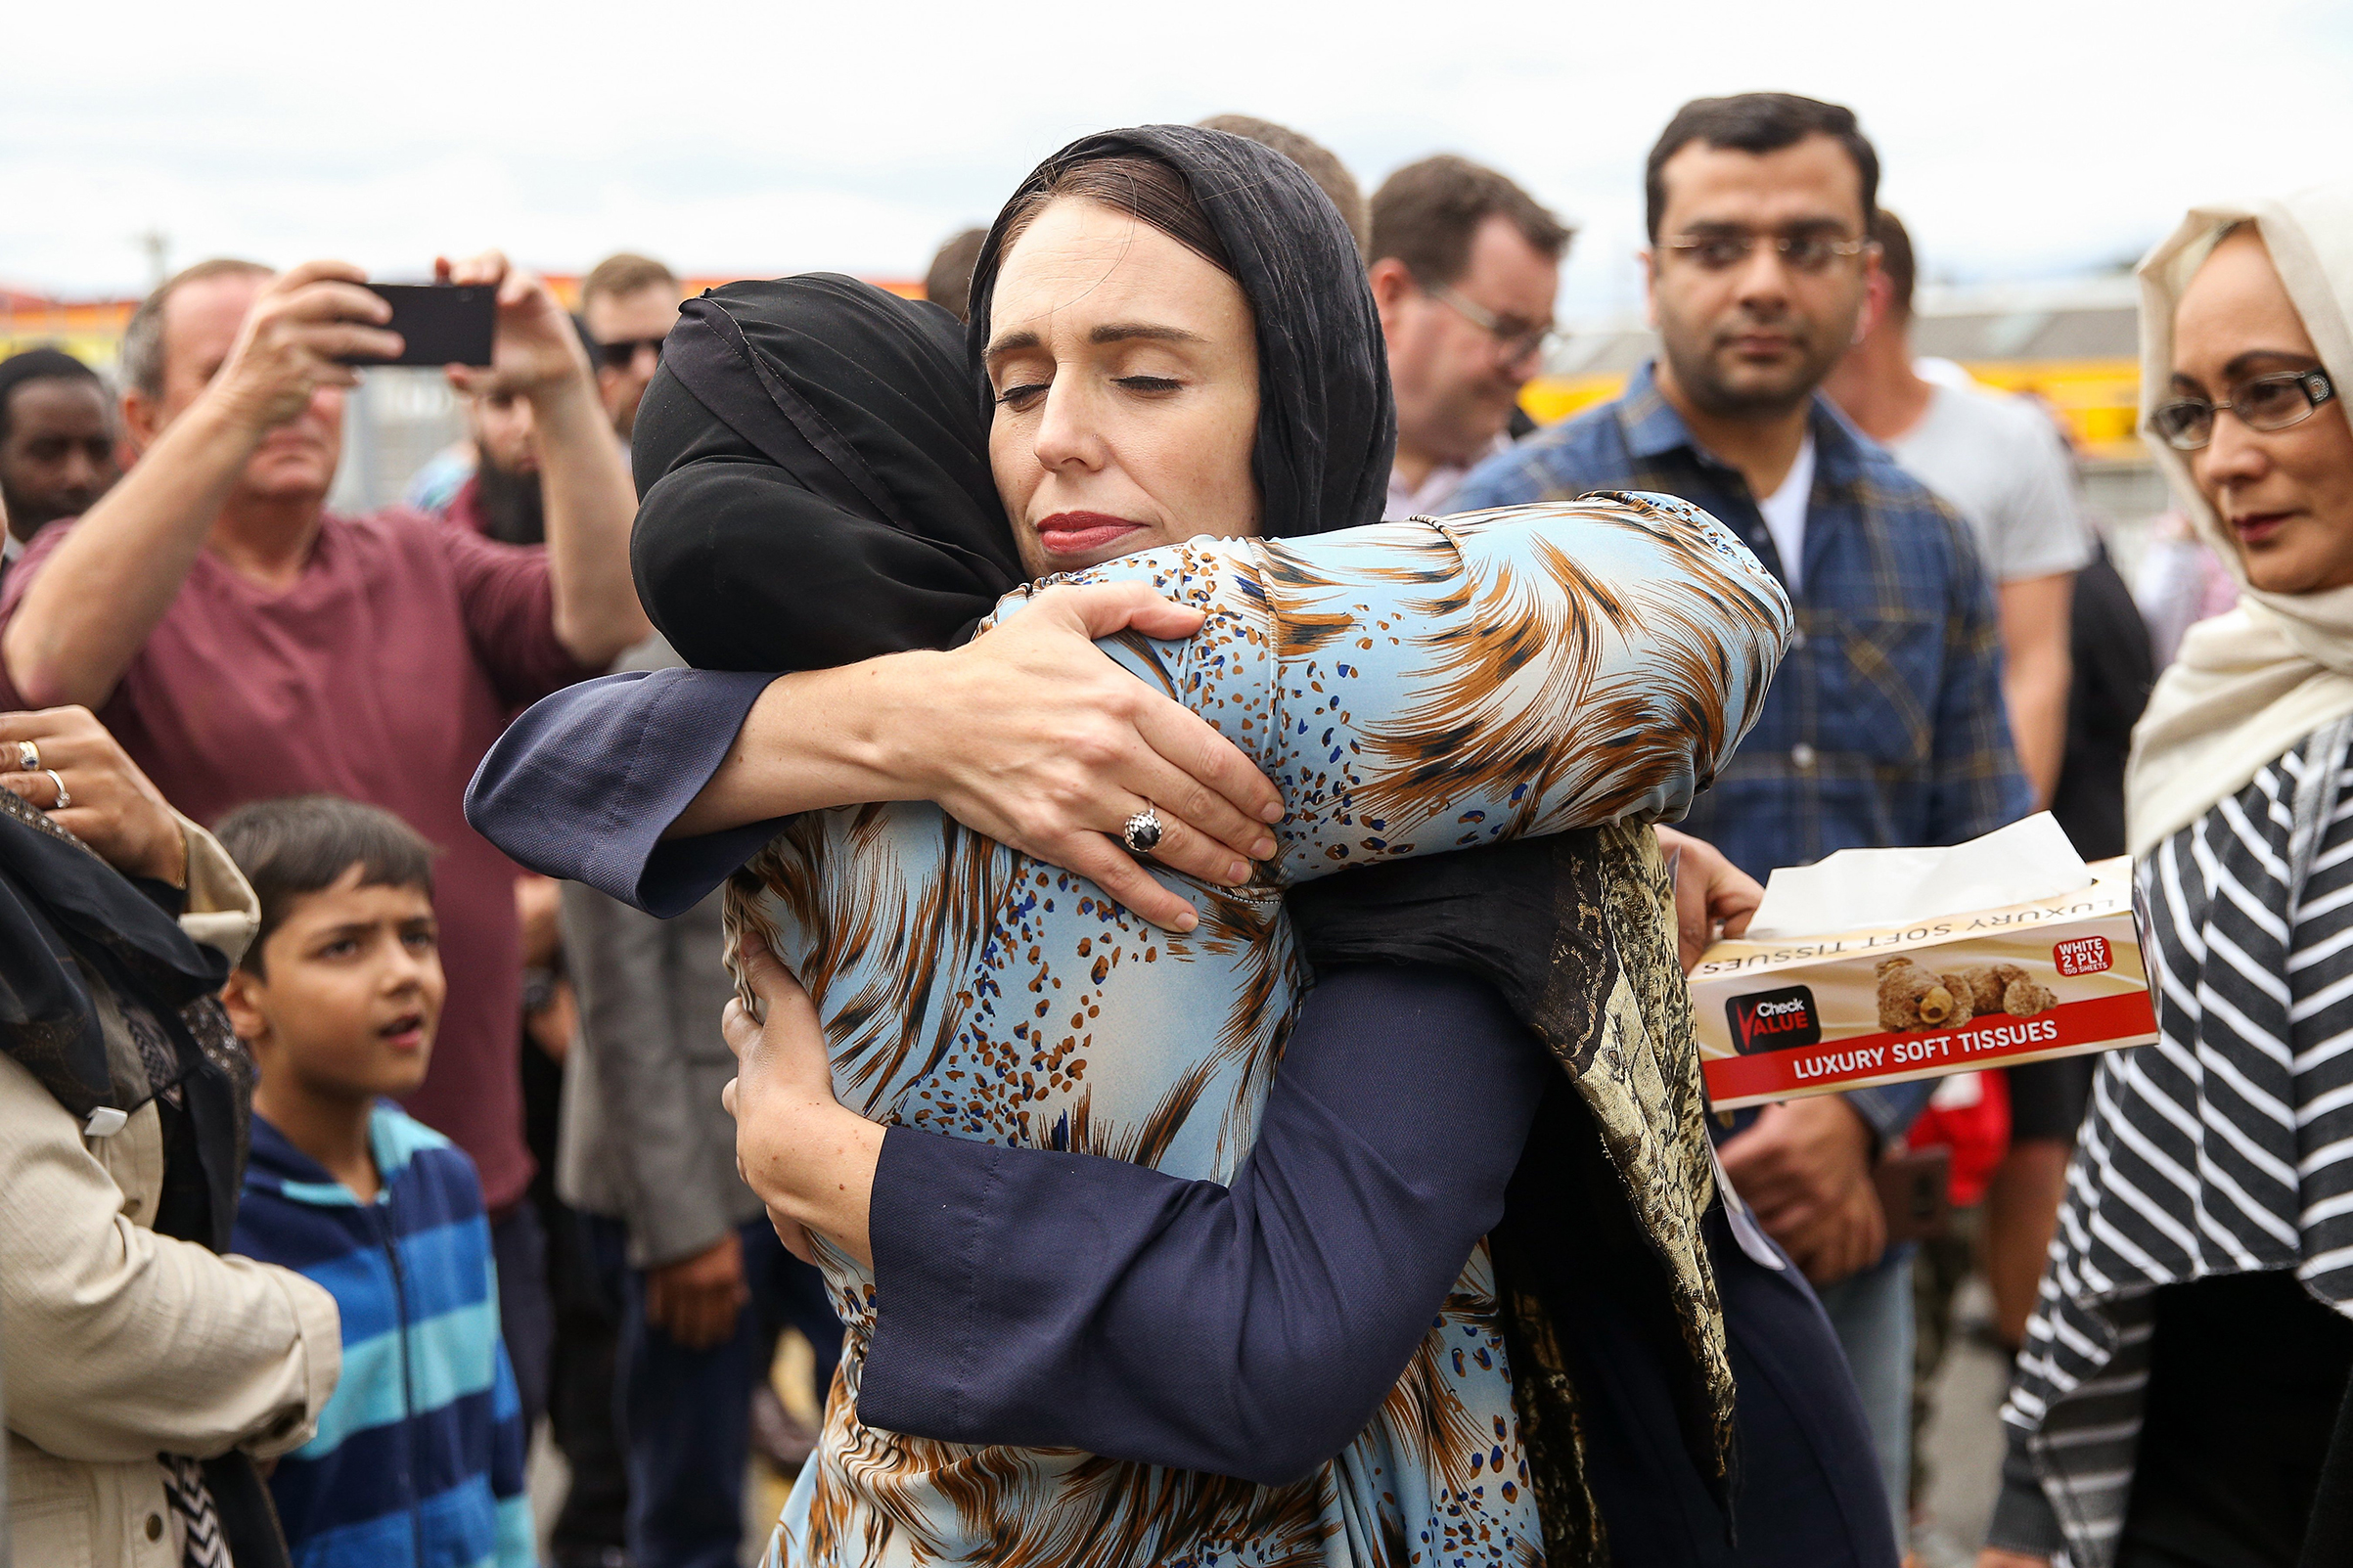 New Zealand Prime Minister Jacinda Ardern hugs a worshipper at Kilbirnie Mosque in Wellington on March 17, 2019, two days after the Christchurch attacks. (Hagen Hopkins—Getty Images)